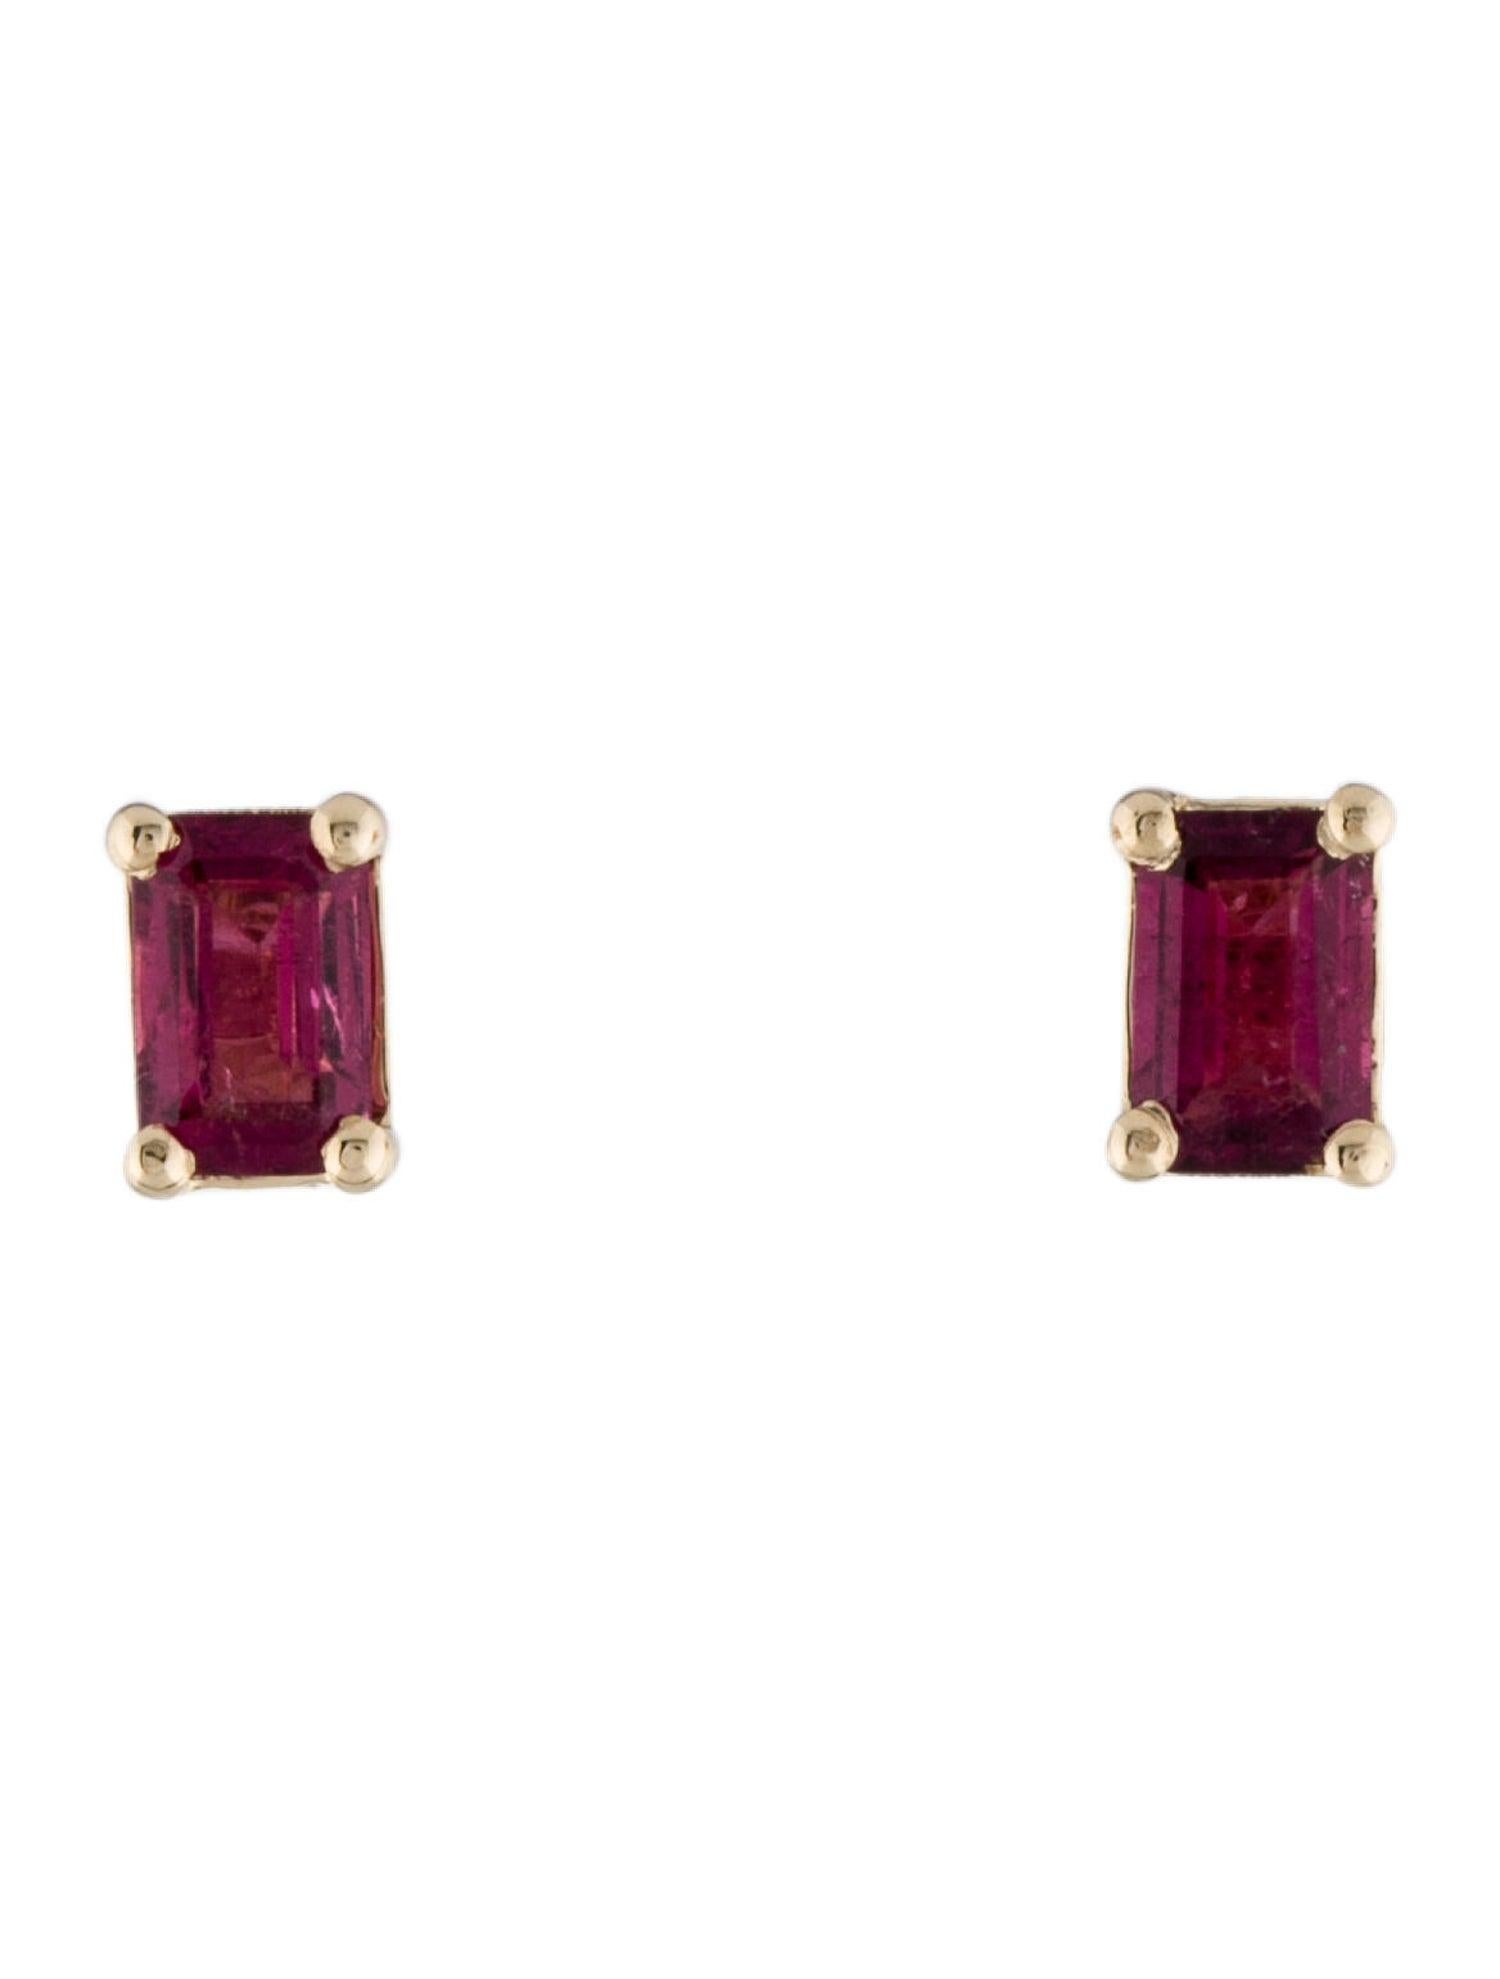 Elevate your style with these exquisite 14K Yellow Gold Tourmaline Stud Earrings, featuring beautifully emerald cut pink tourmalines. These earrings are a testament to classic elegance and modern sophistication, designed for those who appreciate the